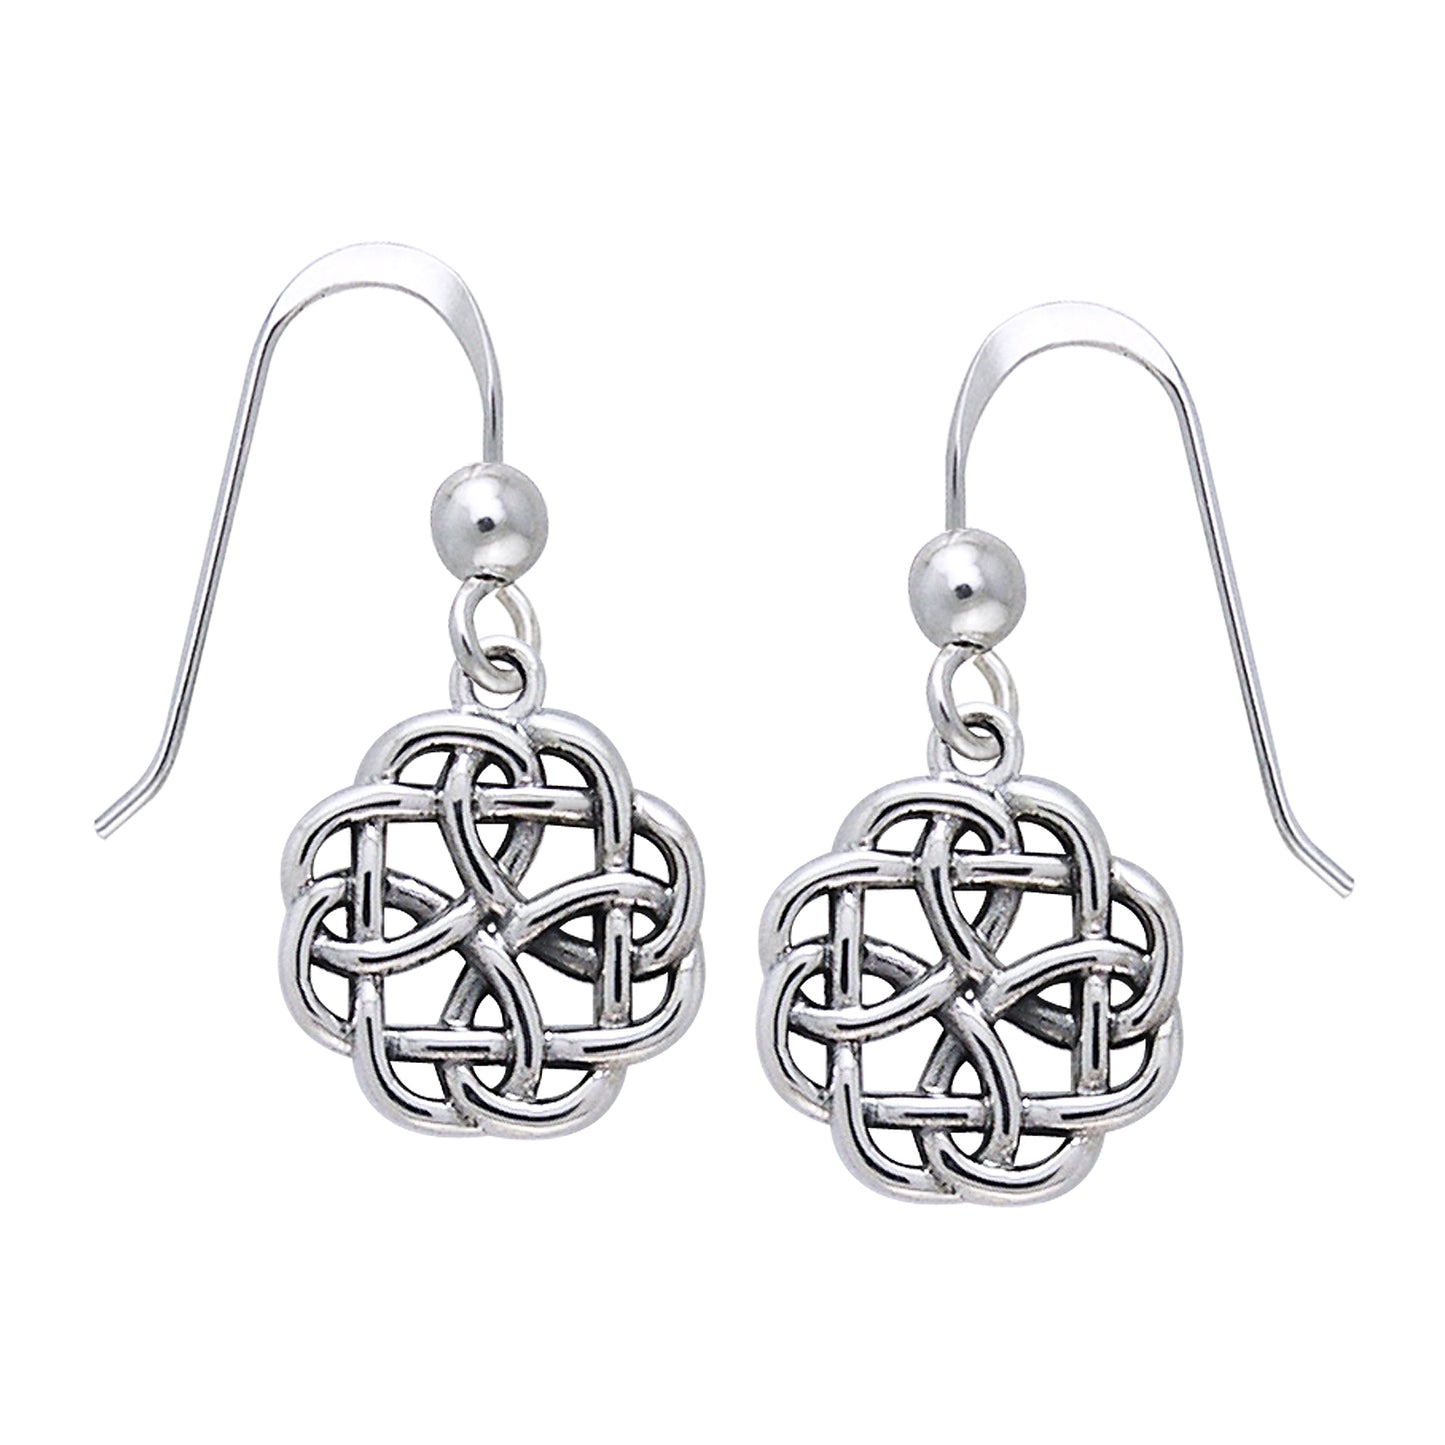 Celtic Knot Flower Dangle Sterling Silver Hook Earrings, Small and Sturdy - Silver Insanity